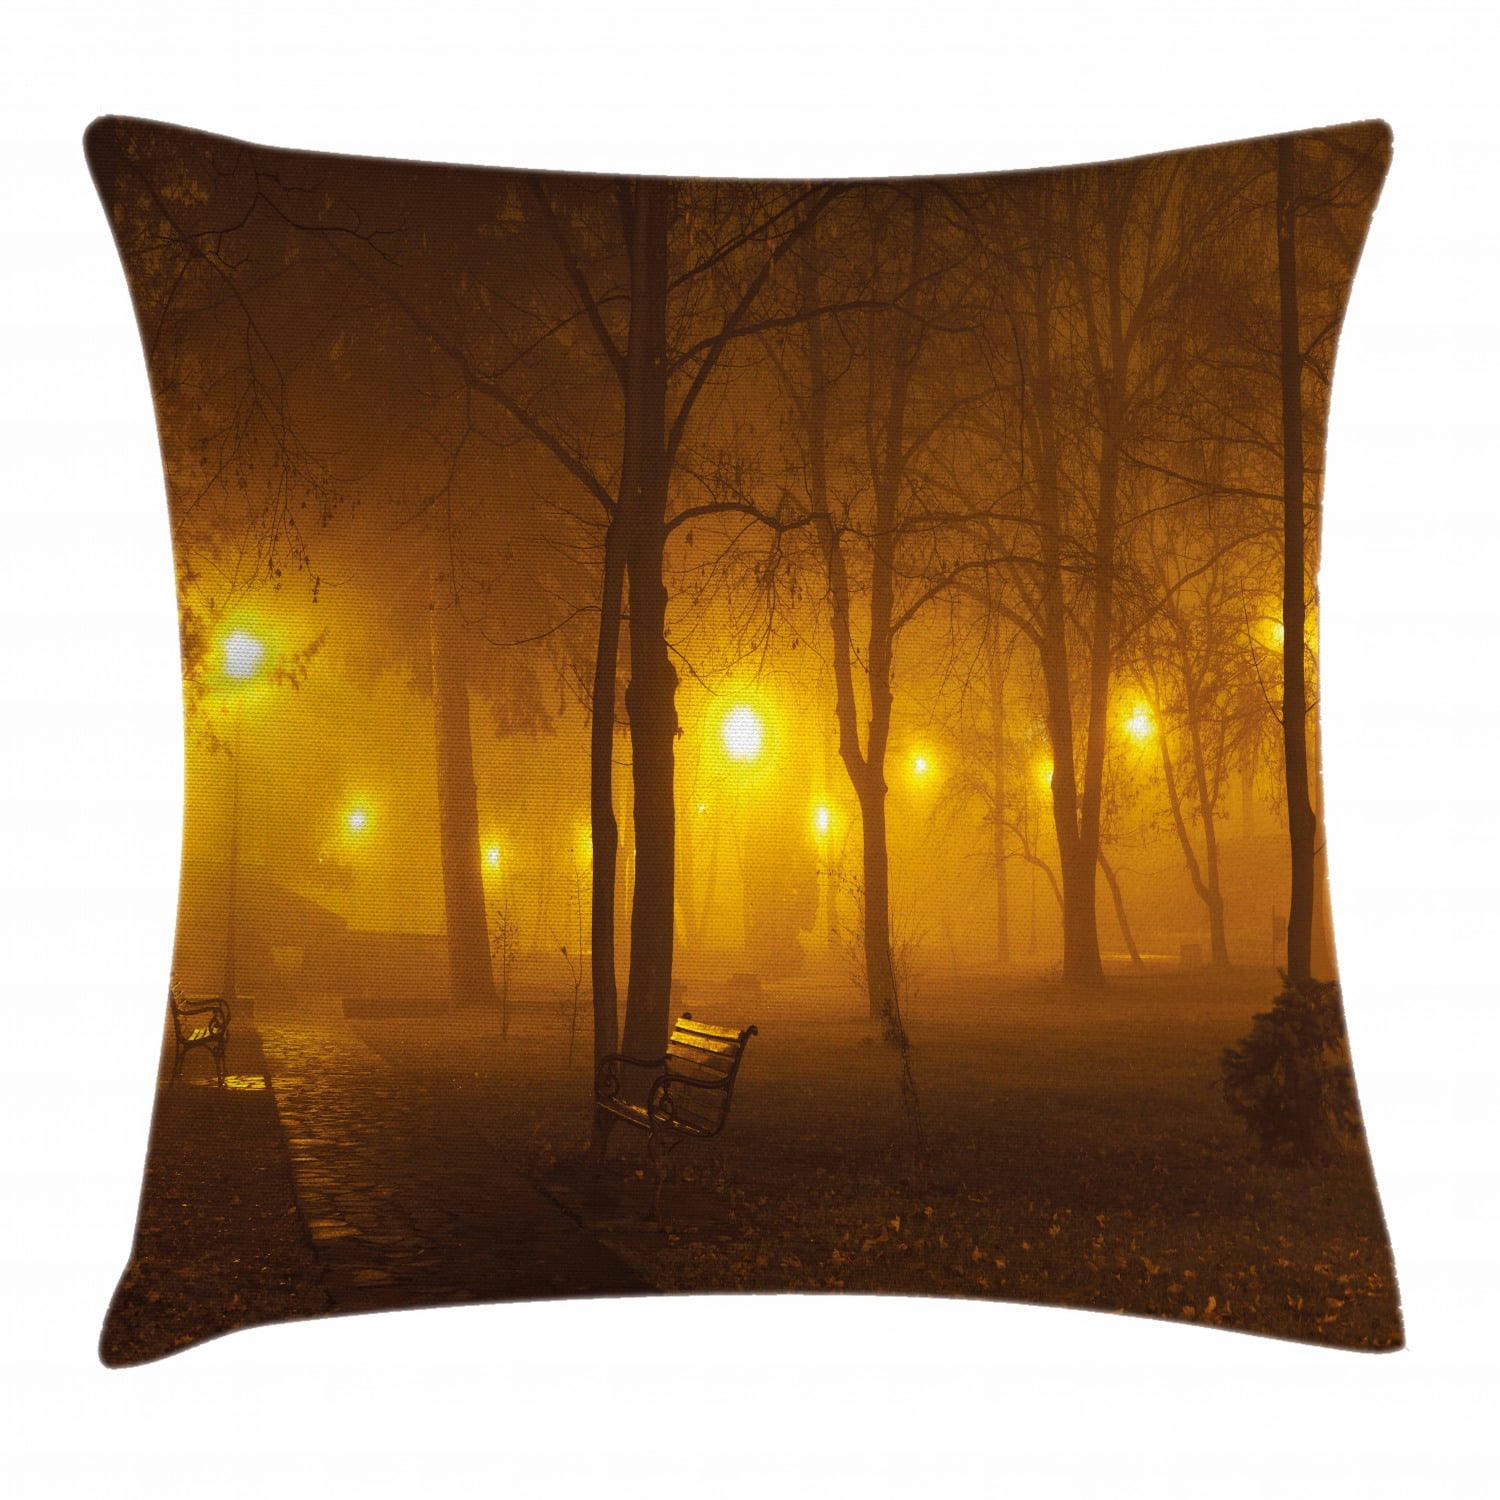 Ambesonne Tree Throw Pillow Cushion Cover Decorative Square Accent Pillow Case Orange Yellow 18 X 18 Autumnal Foggy Park Fall Nature Scenic Scenery Maple Trees Sunbeams Woods 